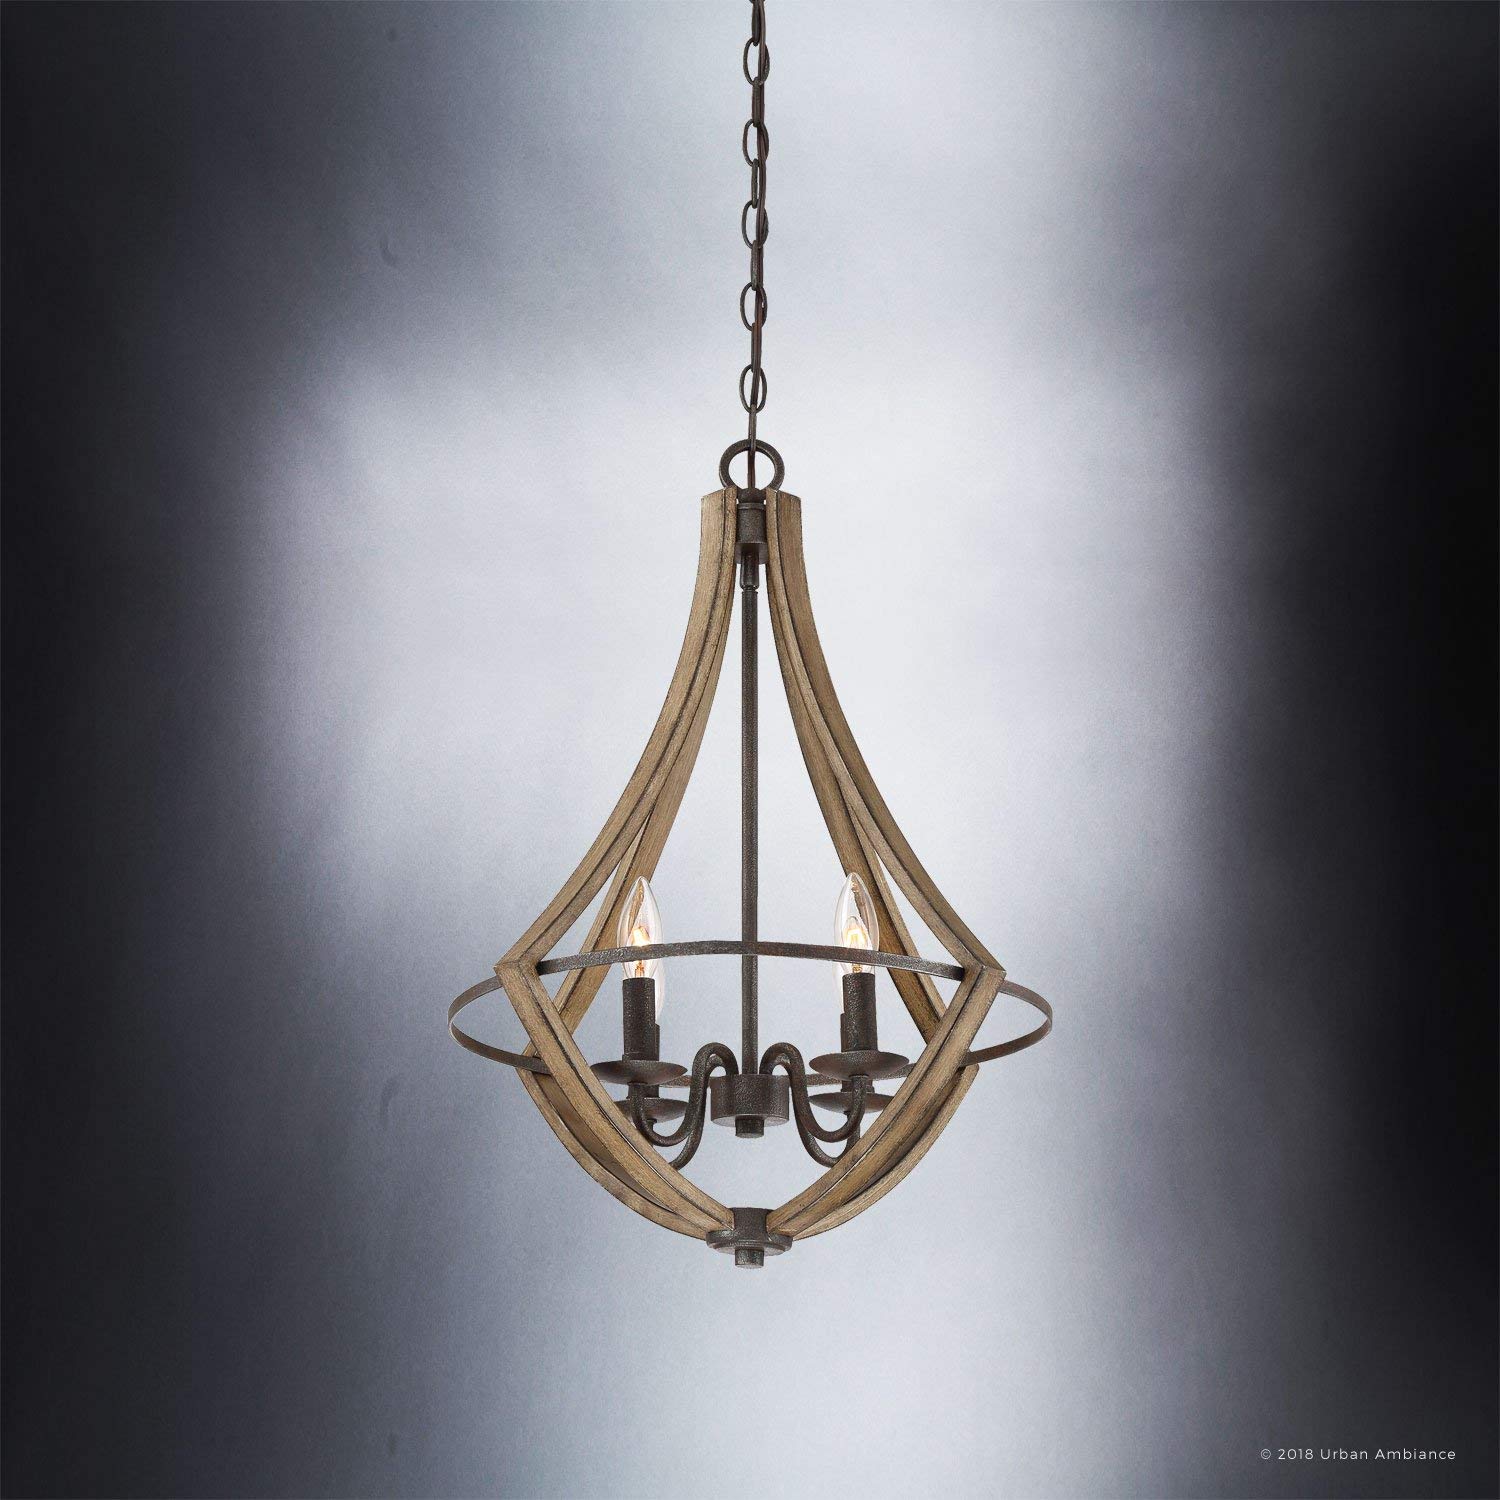 Luxury Farmhouse Chandelier, Medium Size: 24"H x 18.25"W, with Rustic Style Elements, Wood Grain Metal with Antique Black Finish, UQL2962 from The Swansea Collection by Urban Ambiance